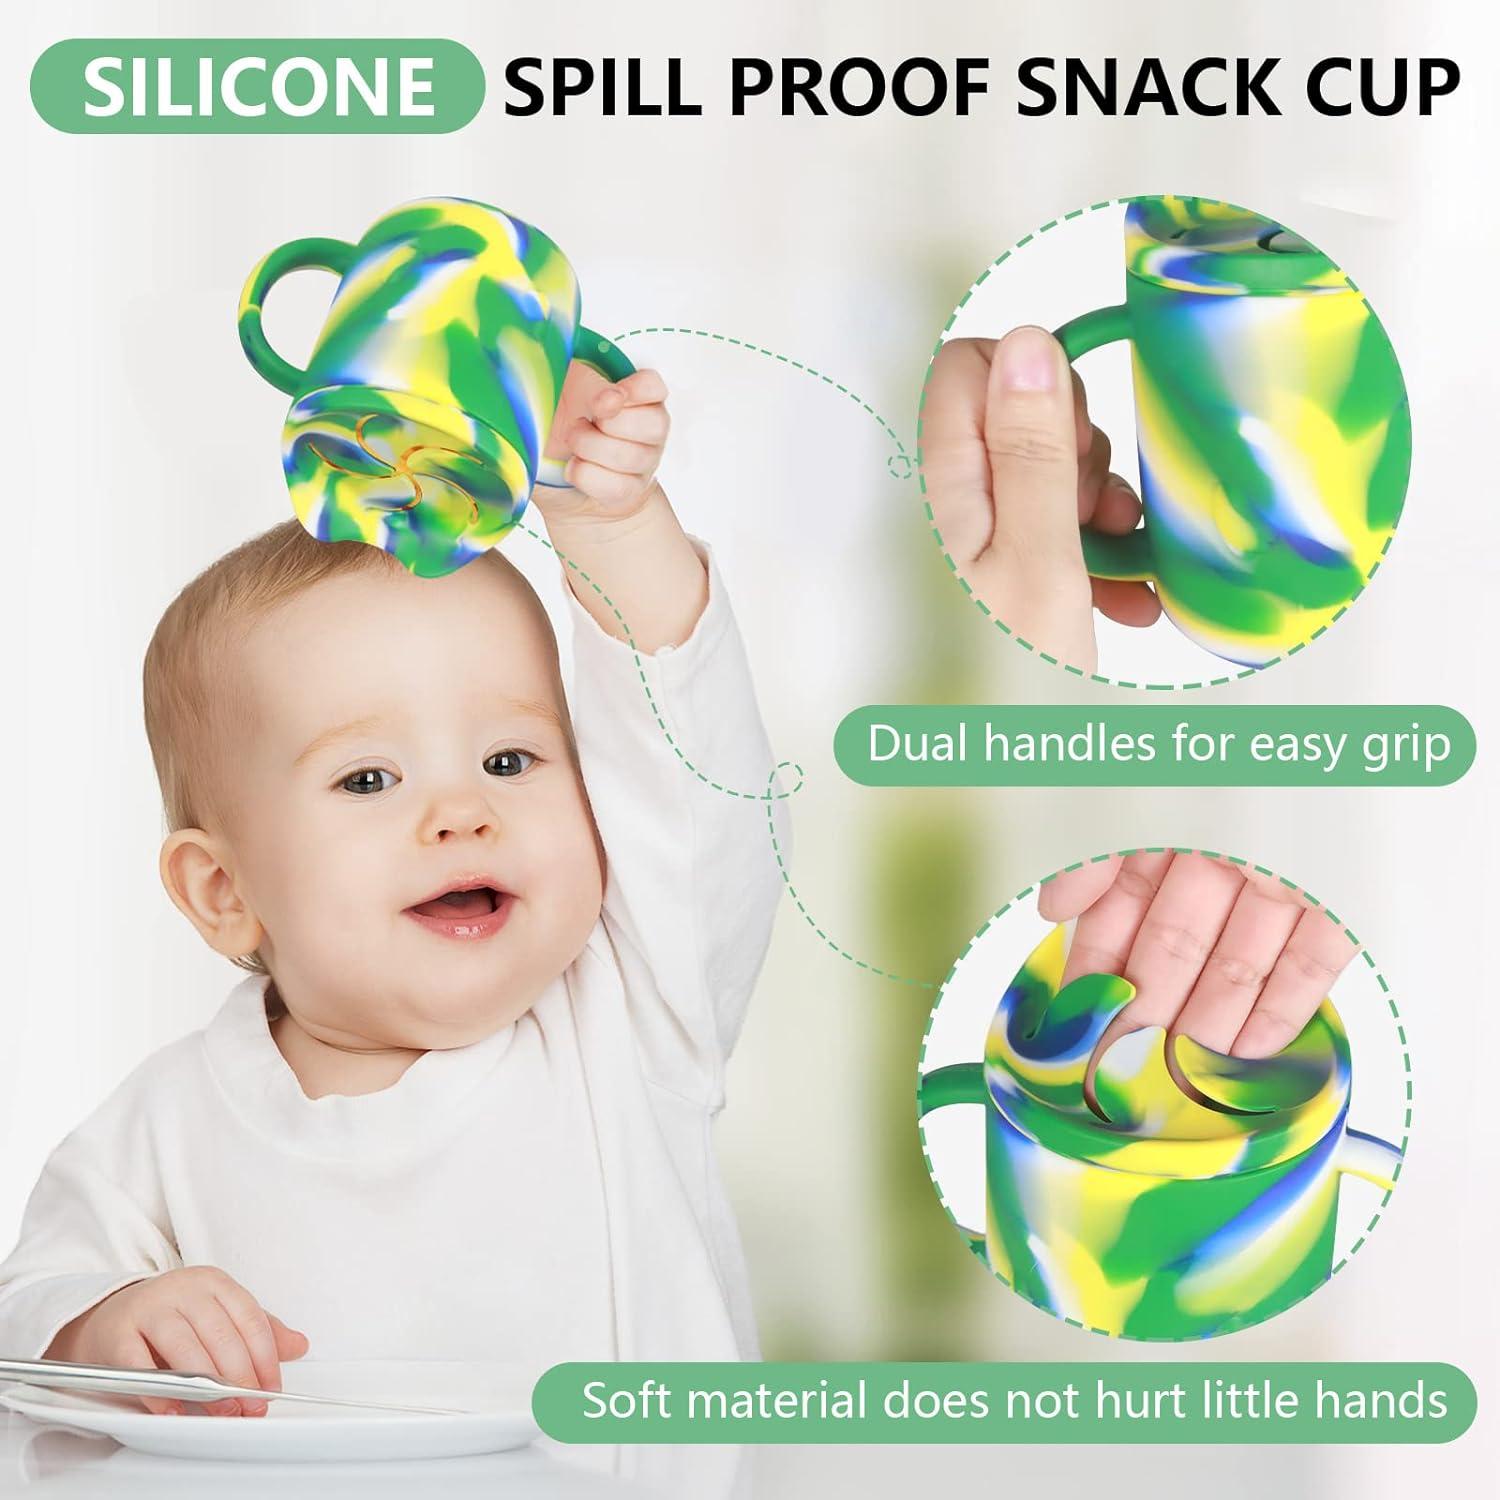 LYASILGC 8oz Toddler Cups - 4 Pack Silicone Sippy Cup Dishwasher Safe and  BPA Free Sippy Cups for Baby 6 Months Removable Toddler Straw Cups Baby  Shower Gifts Snack Cups for Toddlers (Sea Swirl)